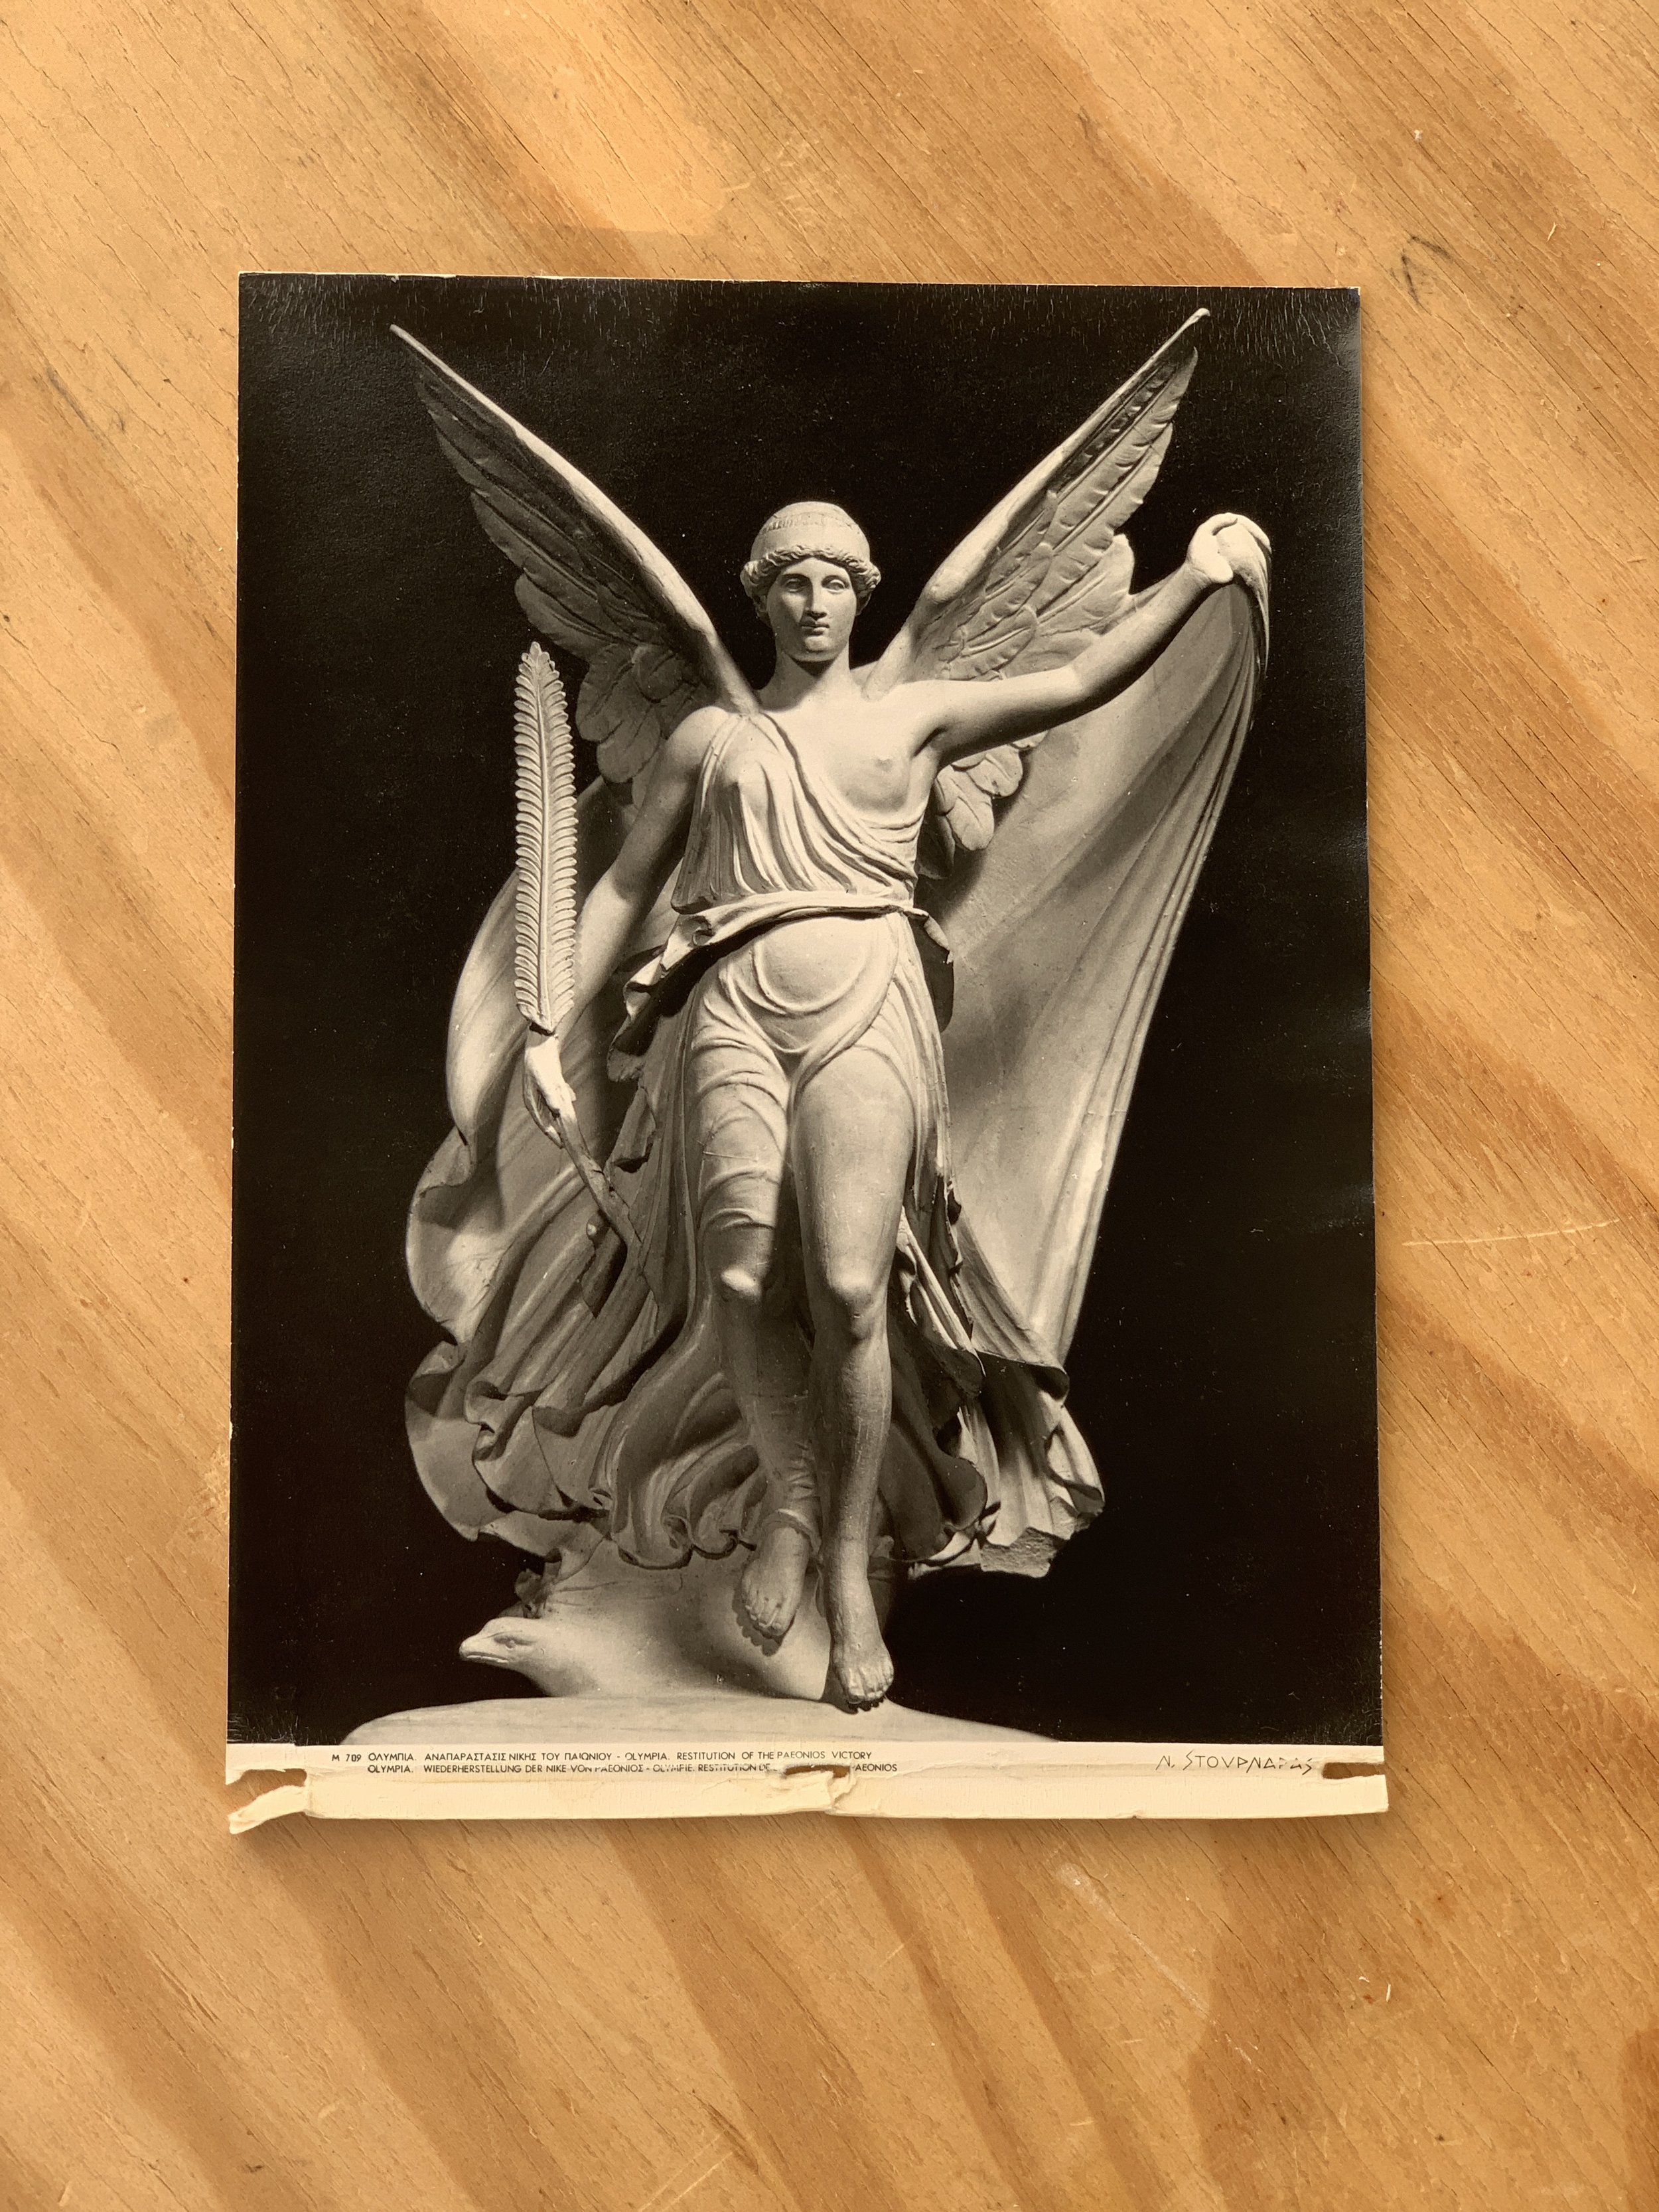 Vintage Greek + Photo of the Statue of Nike by Paionios, 1940s — port•man•teau york